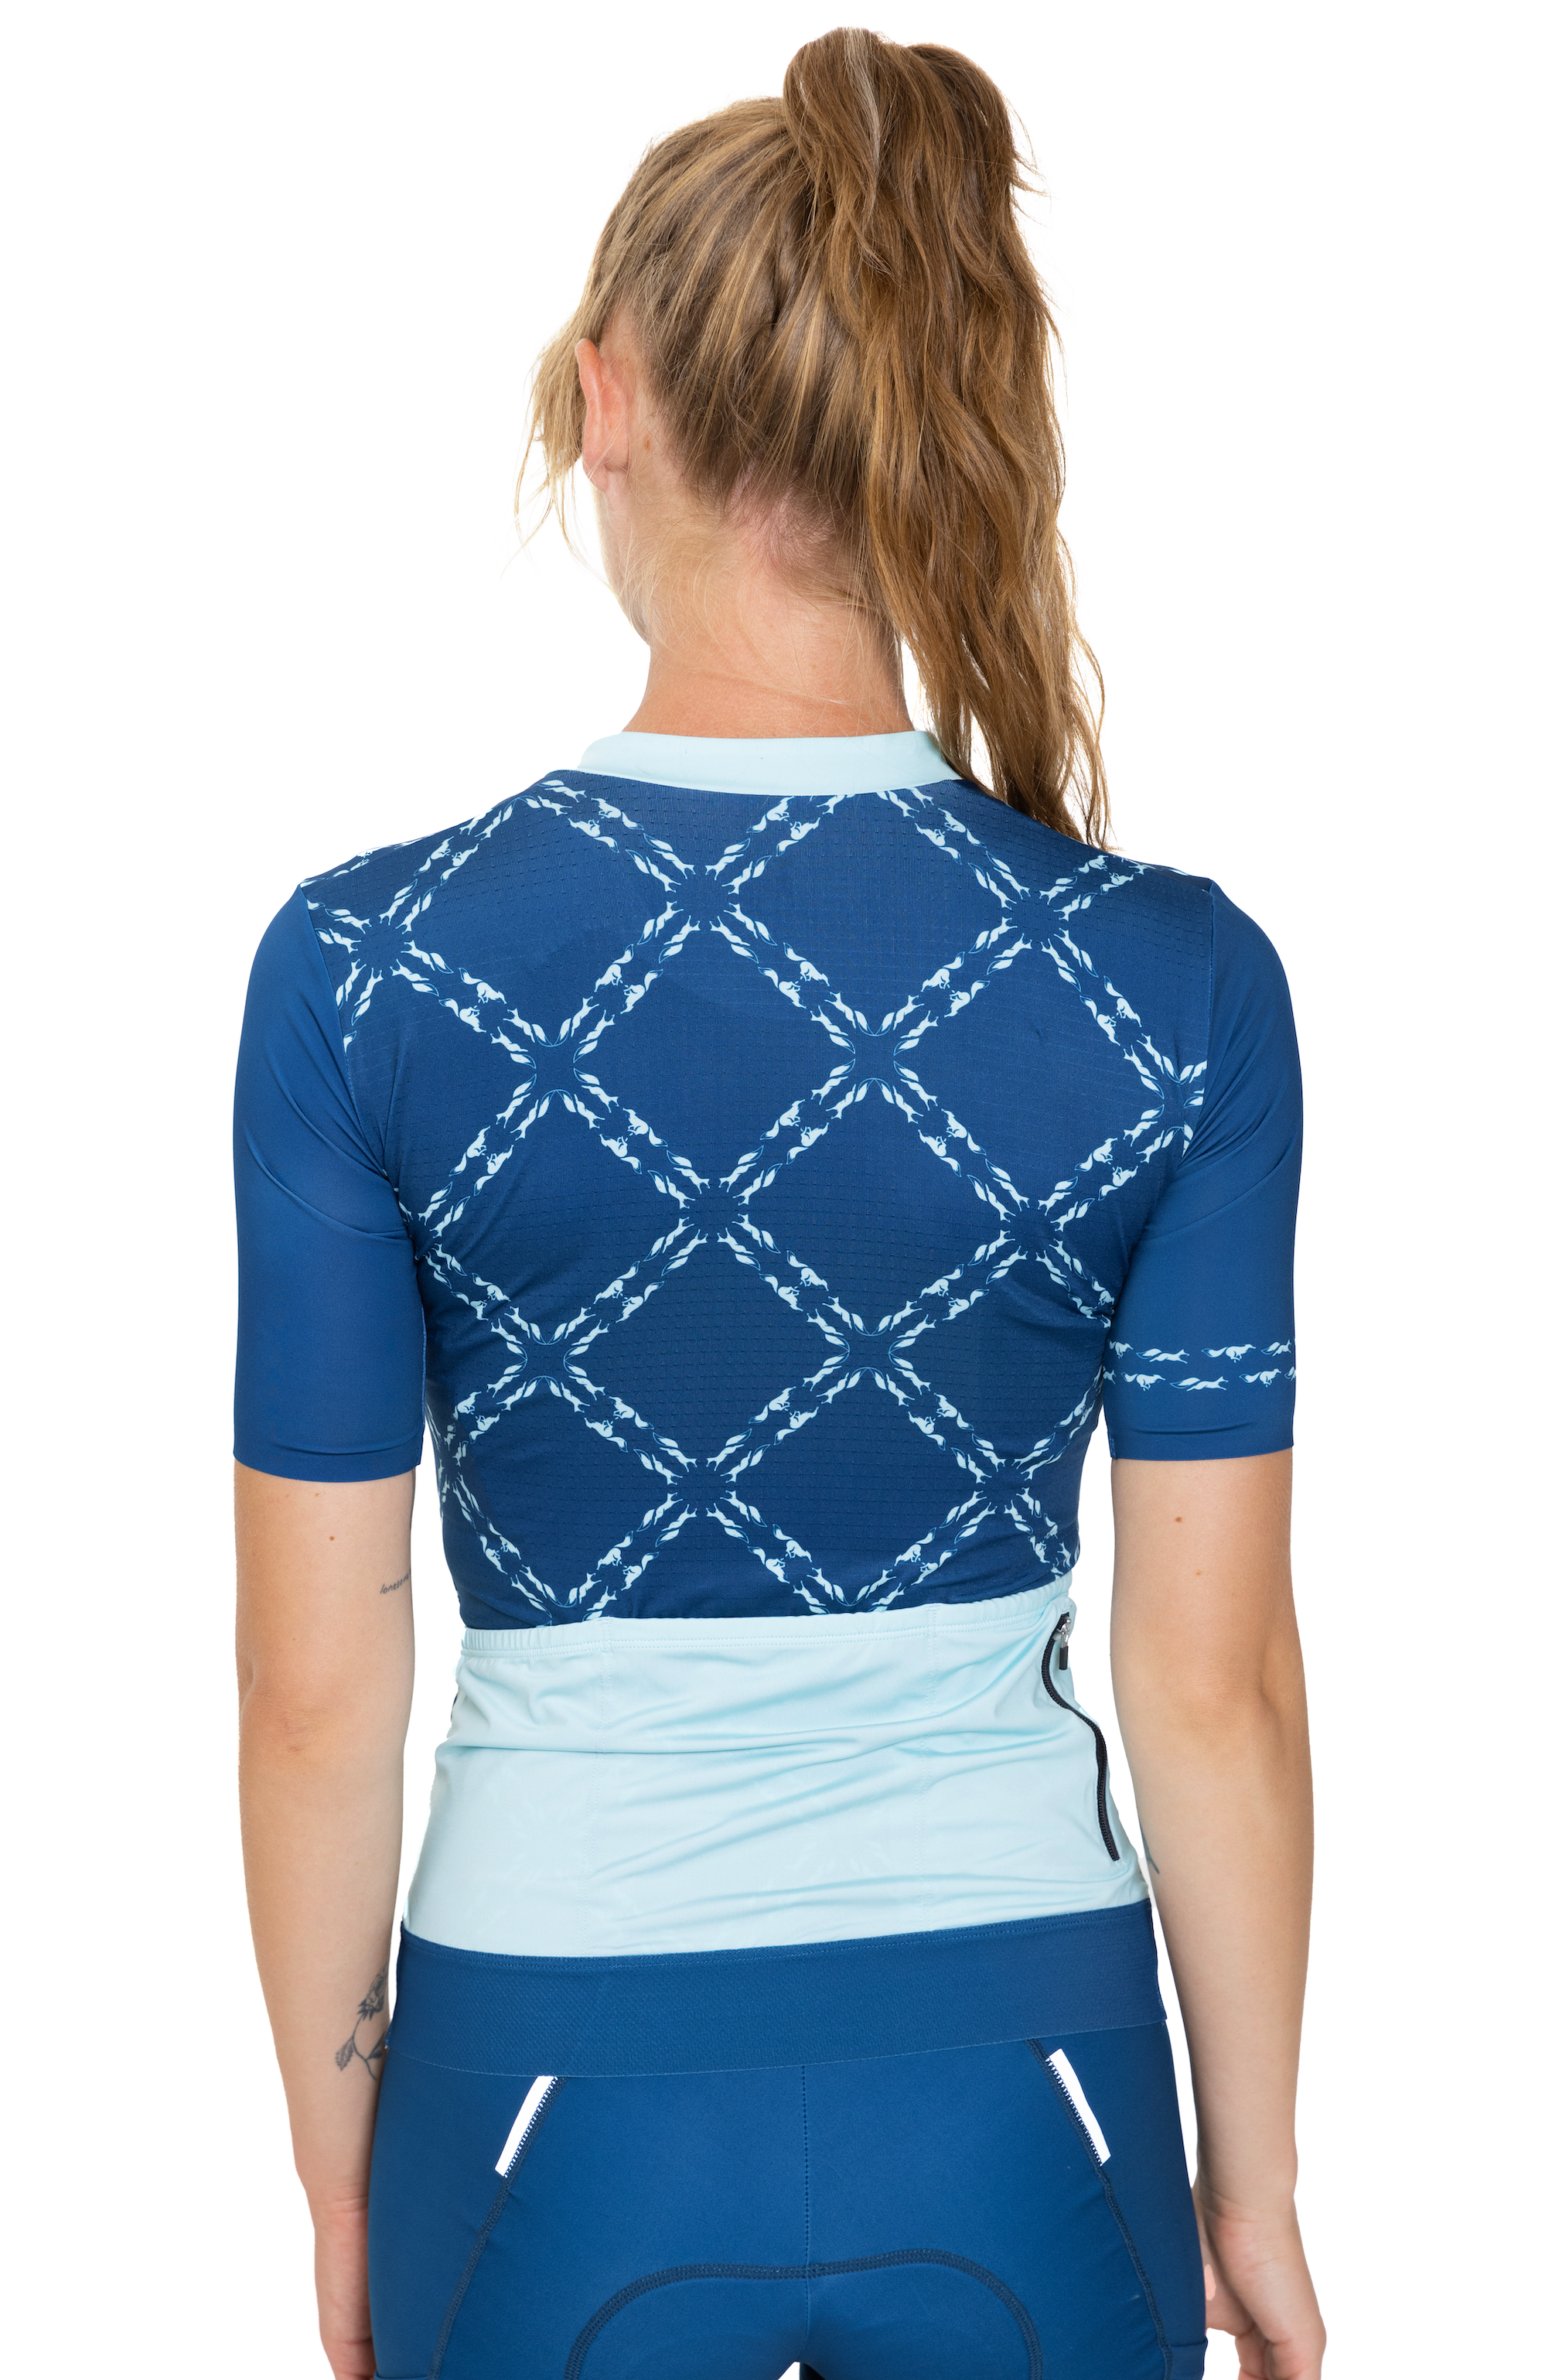 Coeur Sports Cycling Jersey Fleet Foxes Cycling Jersey